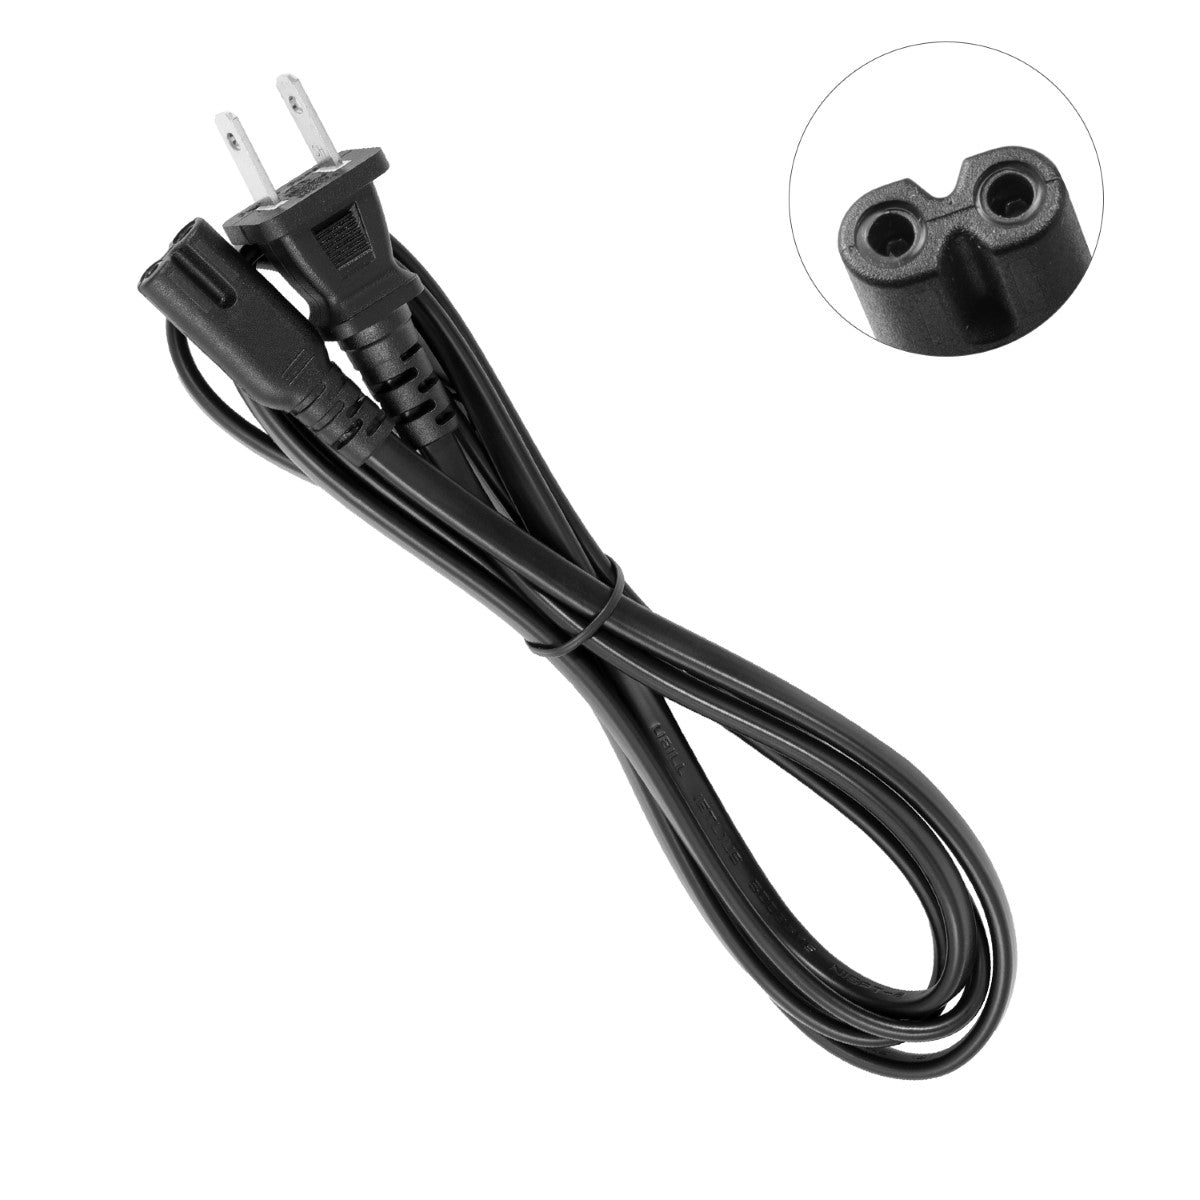 Power Cord for Sony PlayStation 4 Slim.